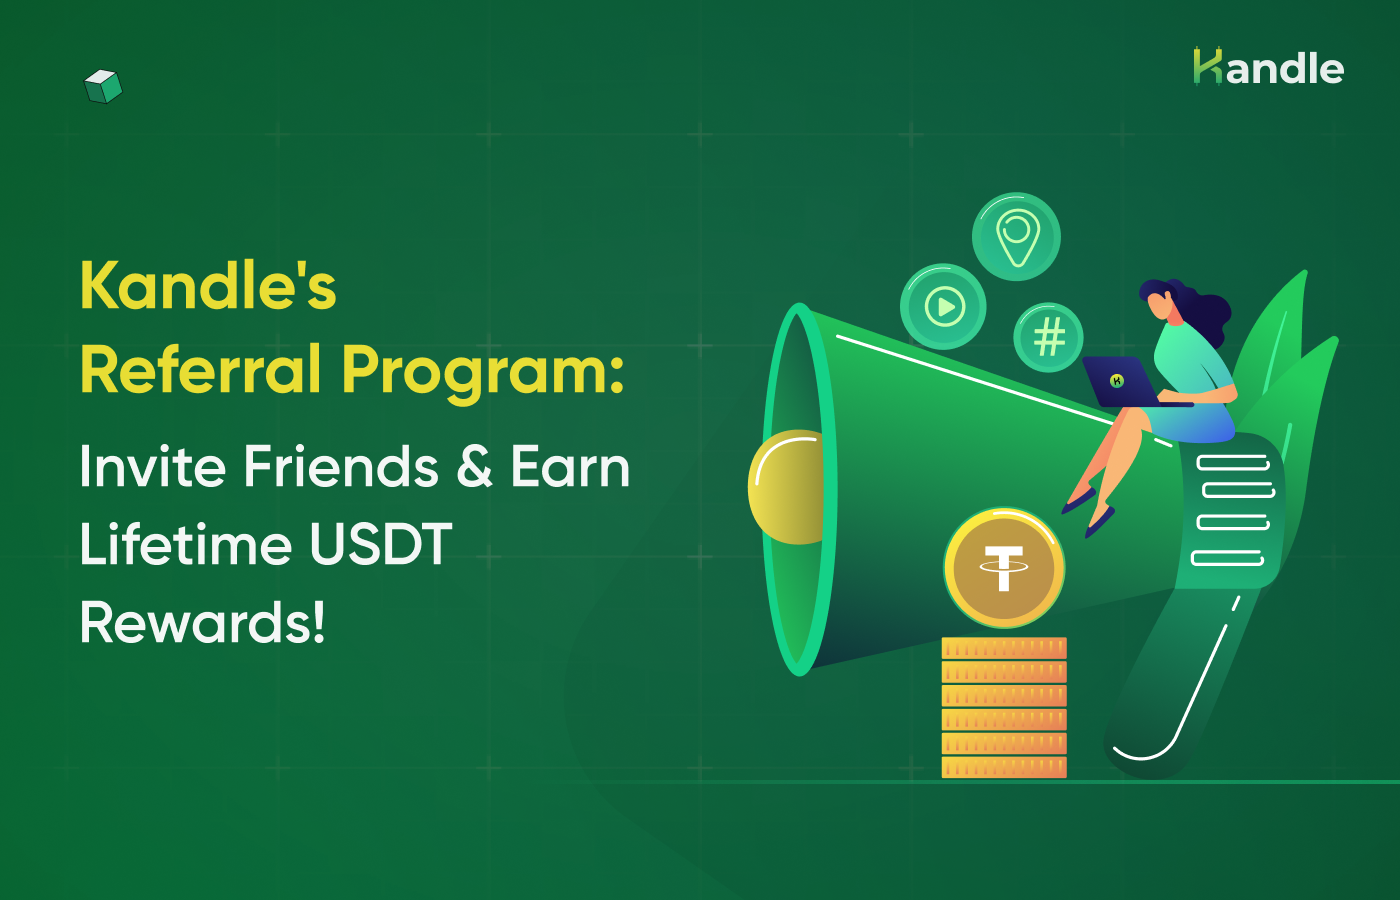 You are currently viewing Kandle’s Referral Program: Invite Friends & Earn Lifetime USDT Rewards!